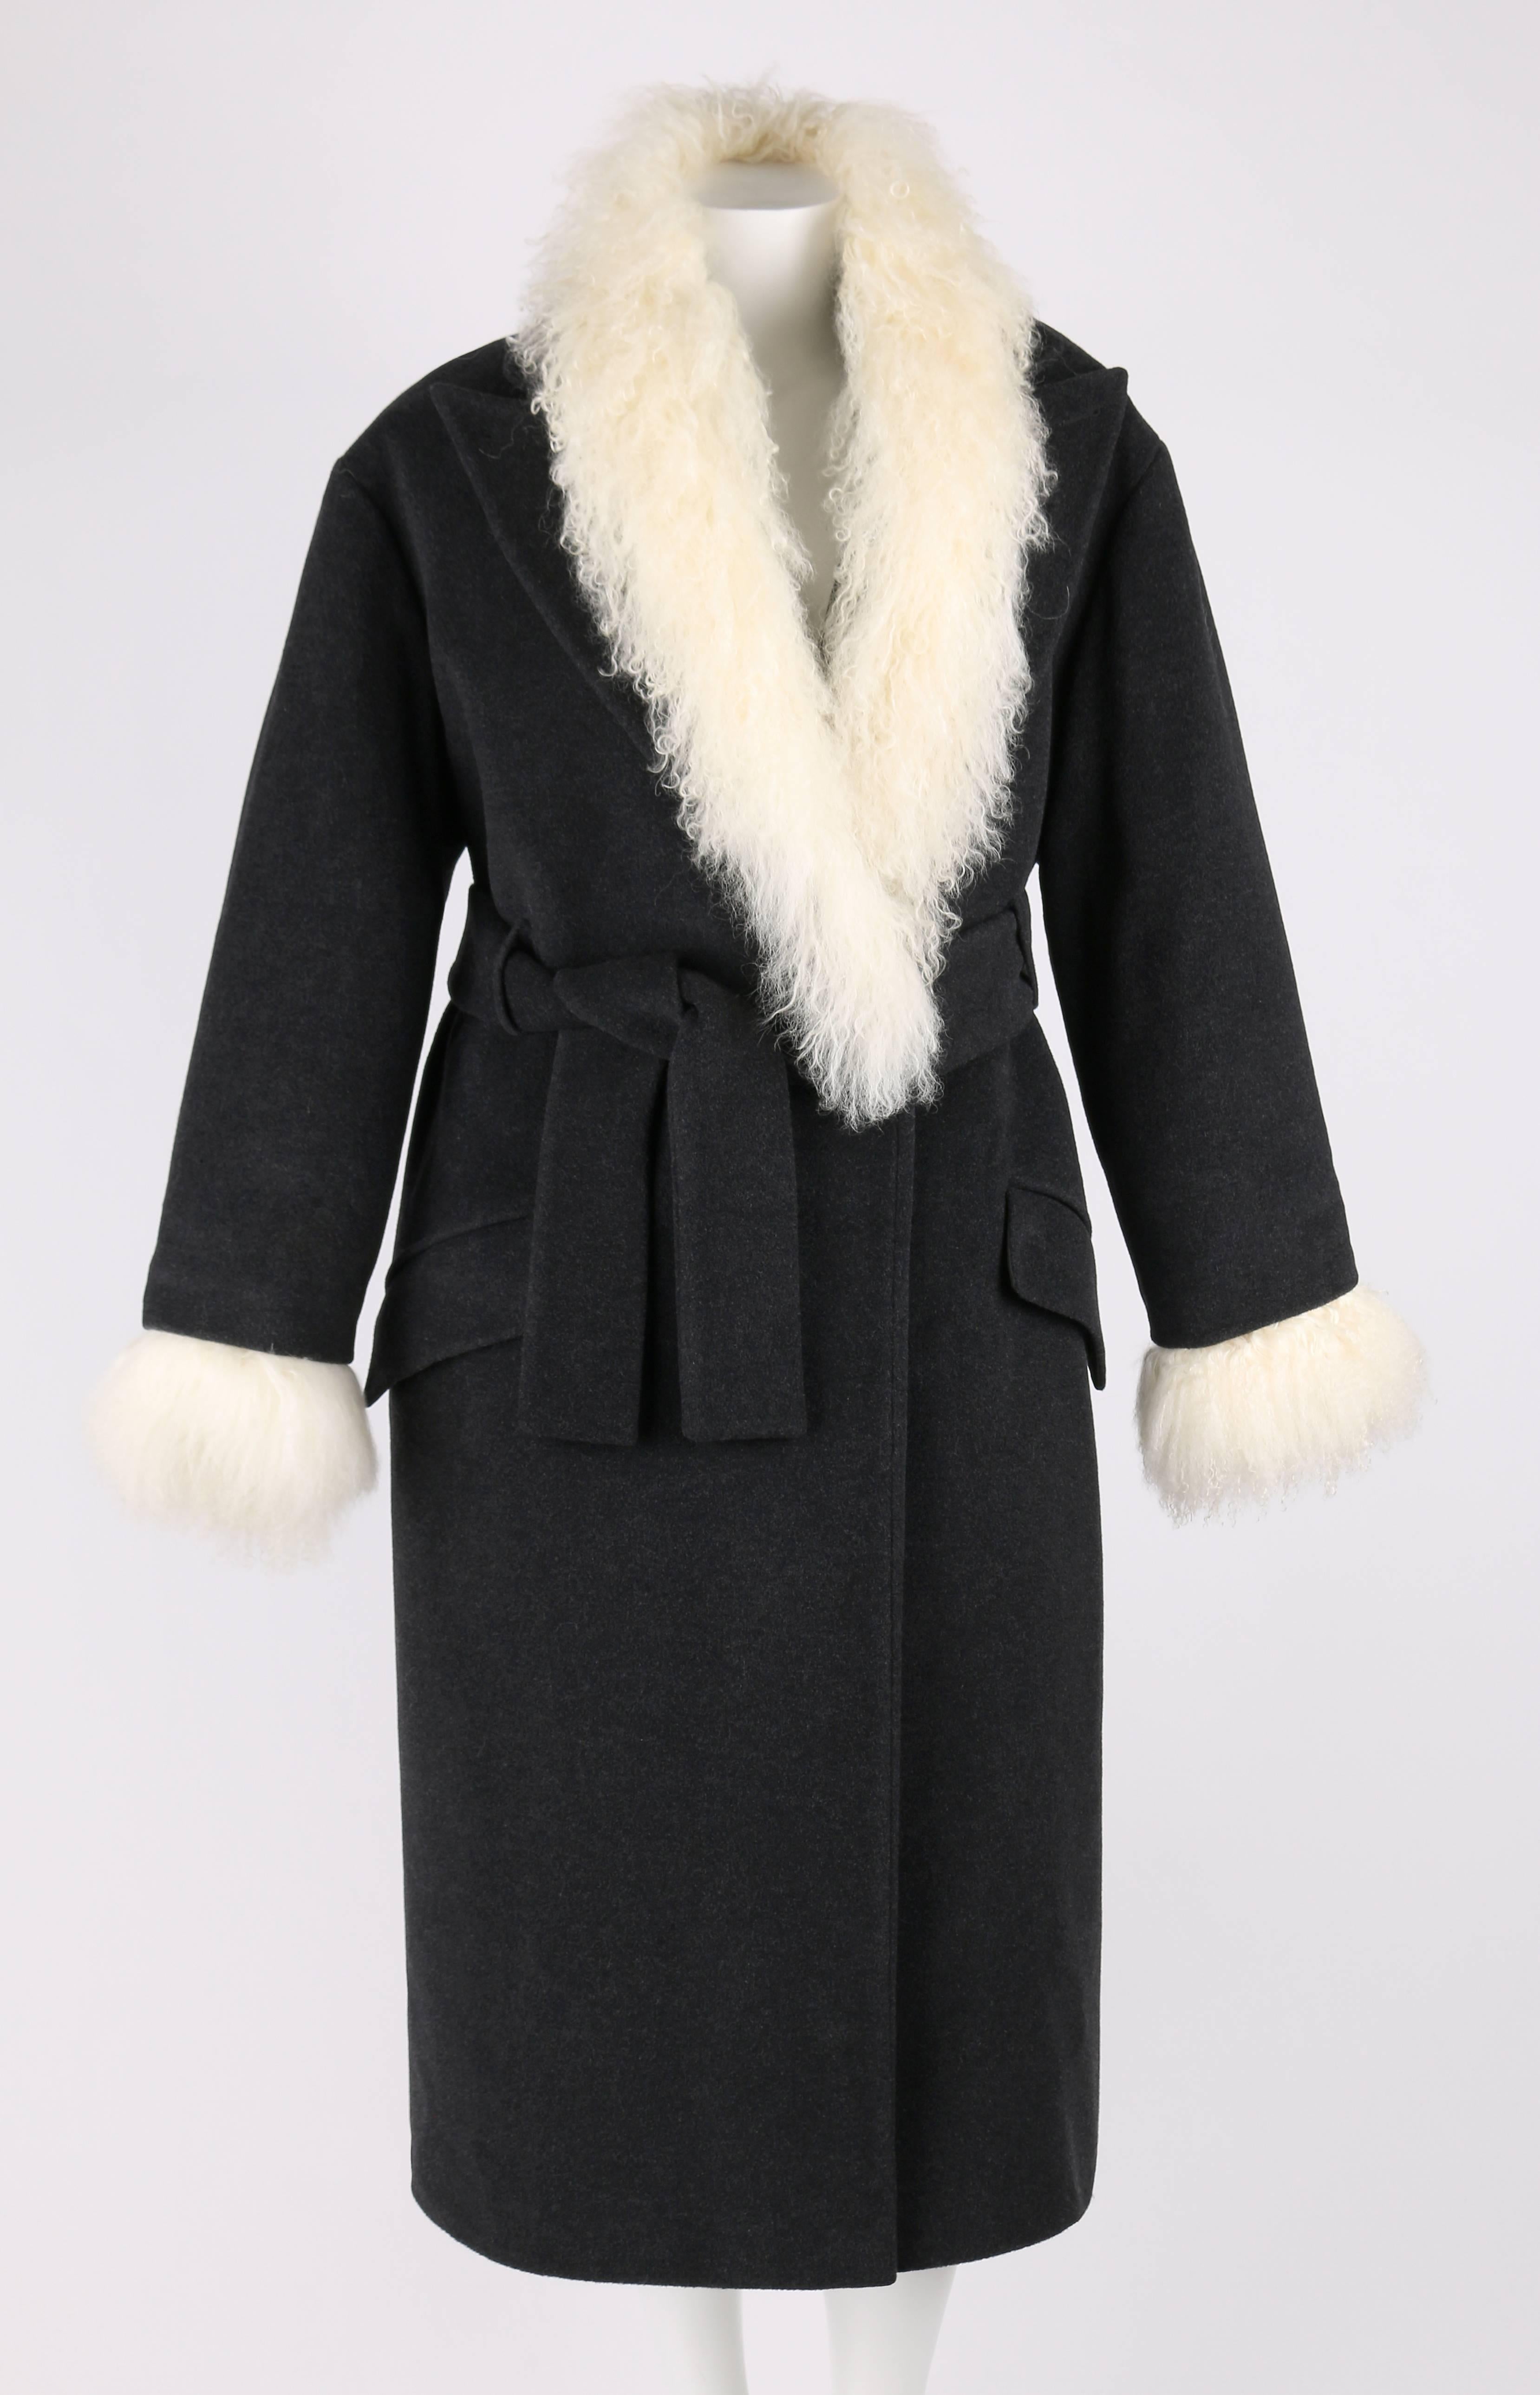 Alexander McQueen c. 2000 charcoal gray wool coat with genuine ivory Mongolian lamb fur trim. Extremely rare early design. Open front - mongolian lamb creates a shawl collar appearance. Closes with tie belt at waist. Two flap pockets (original